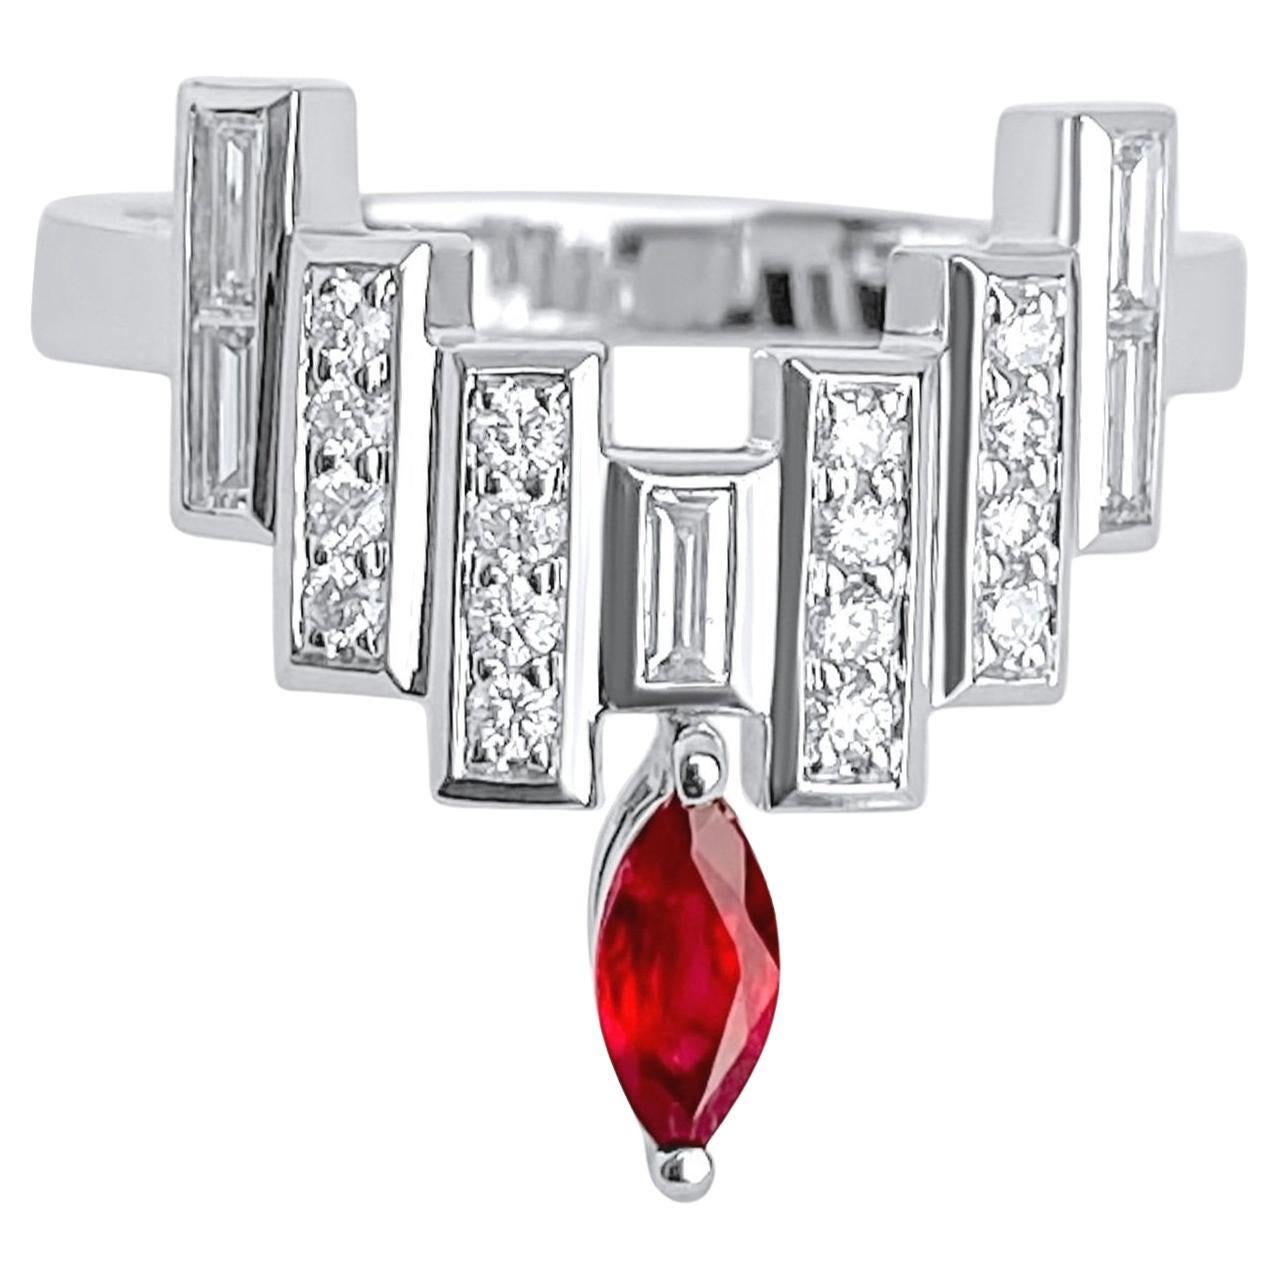 Enlightenment Celestial Crown Tiara Diamond Baguette and Ruby Ring LARGE For Sale